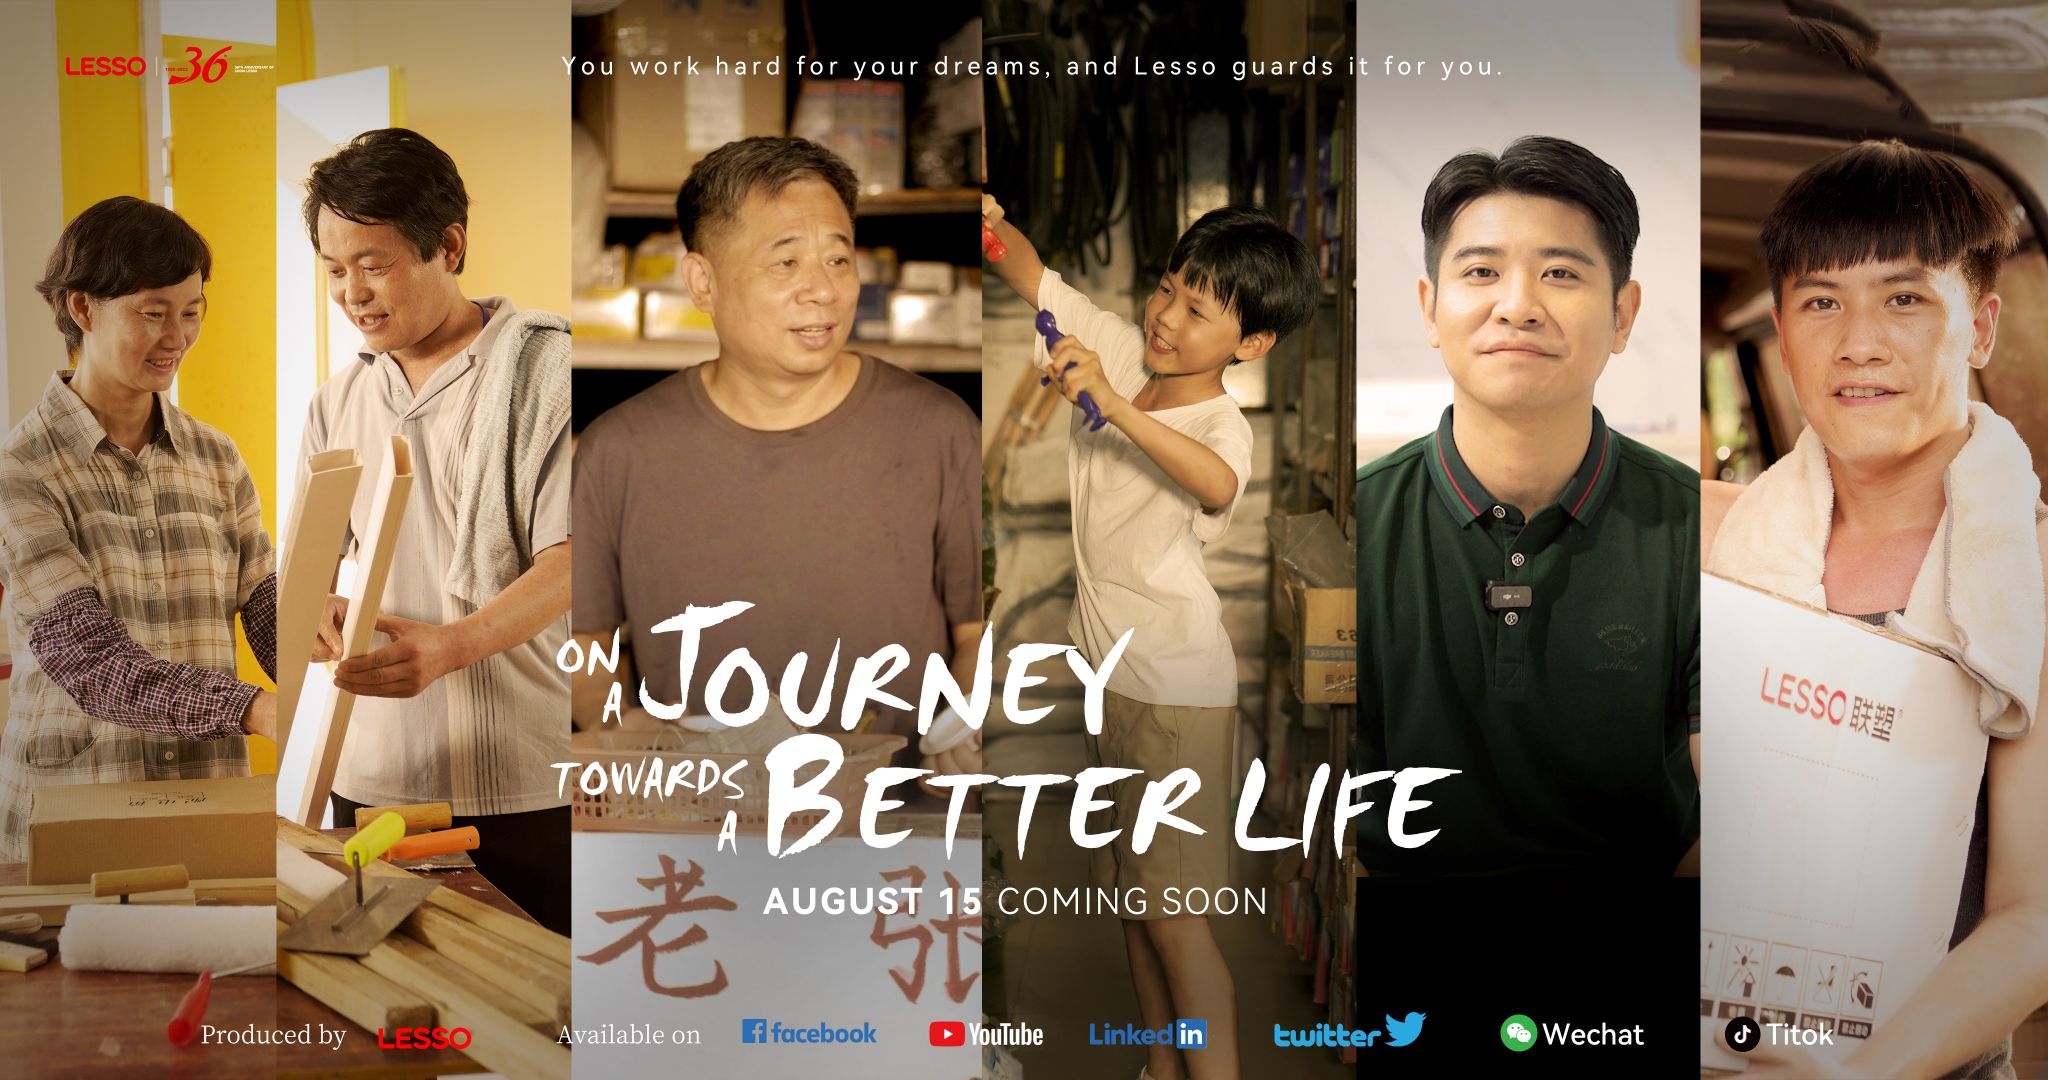 On a Journey towards a better life | China's Lesso 36th Anniversary